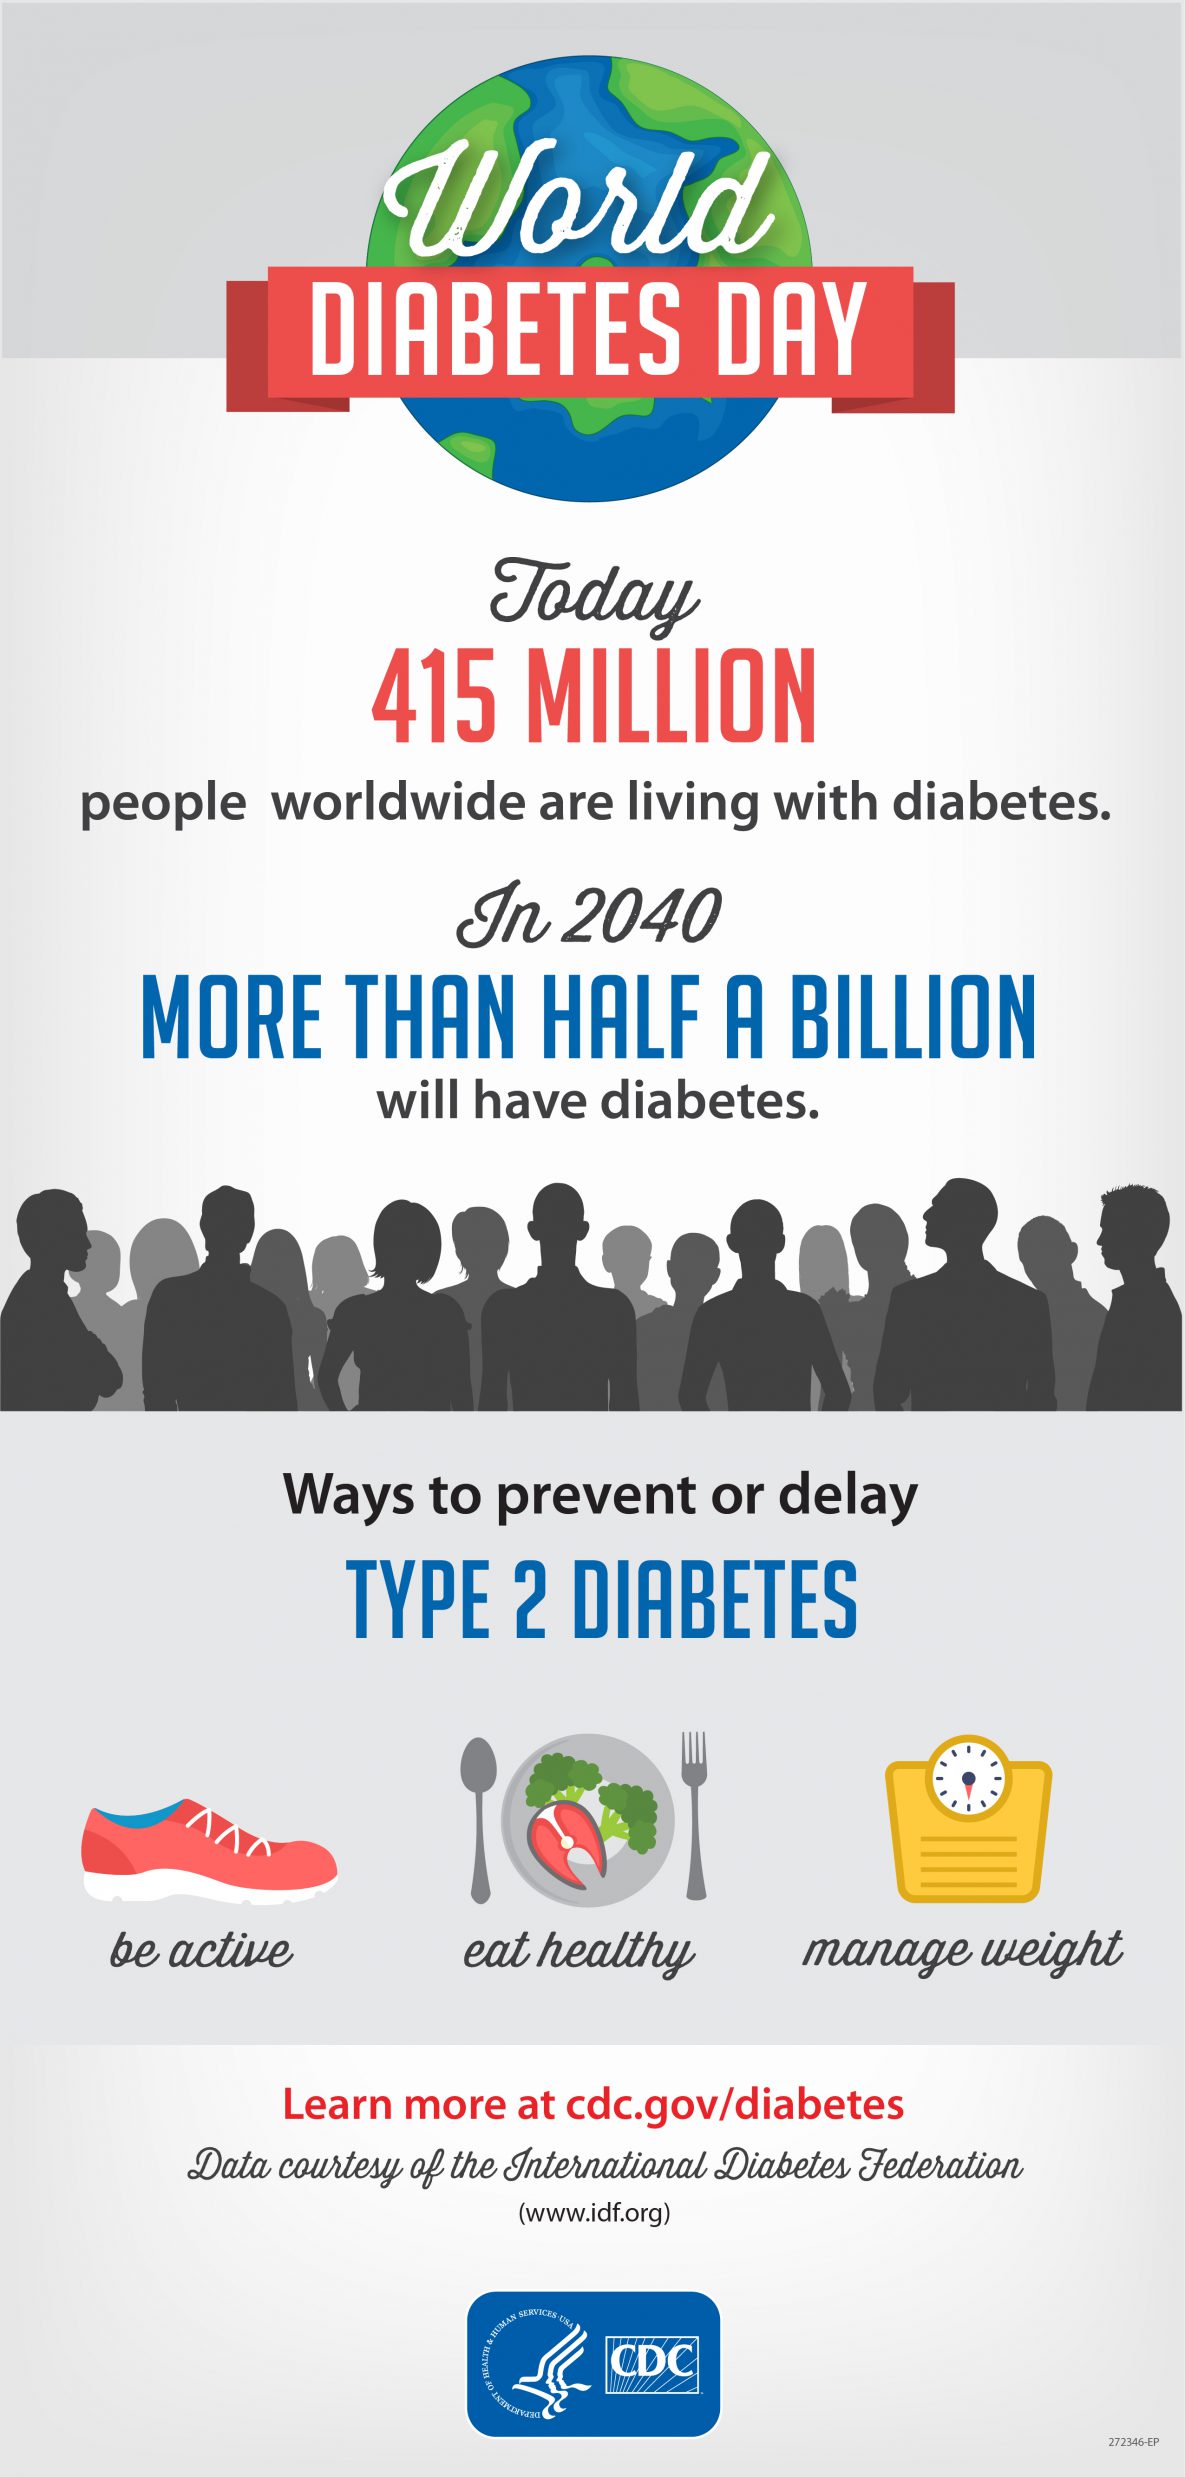 Today 415 million people worldwide are living with diabetes. In 2040 more than half a billion will have diabetes